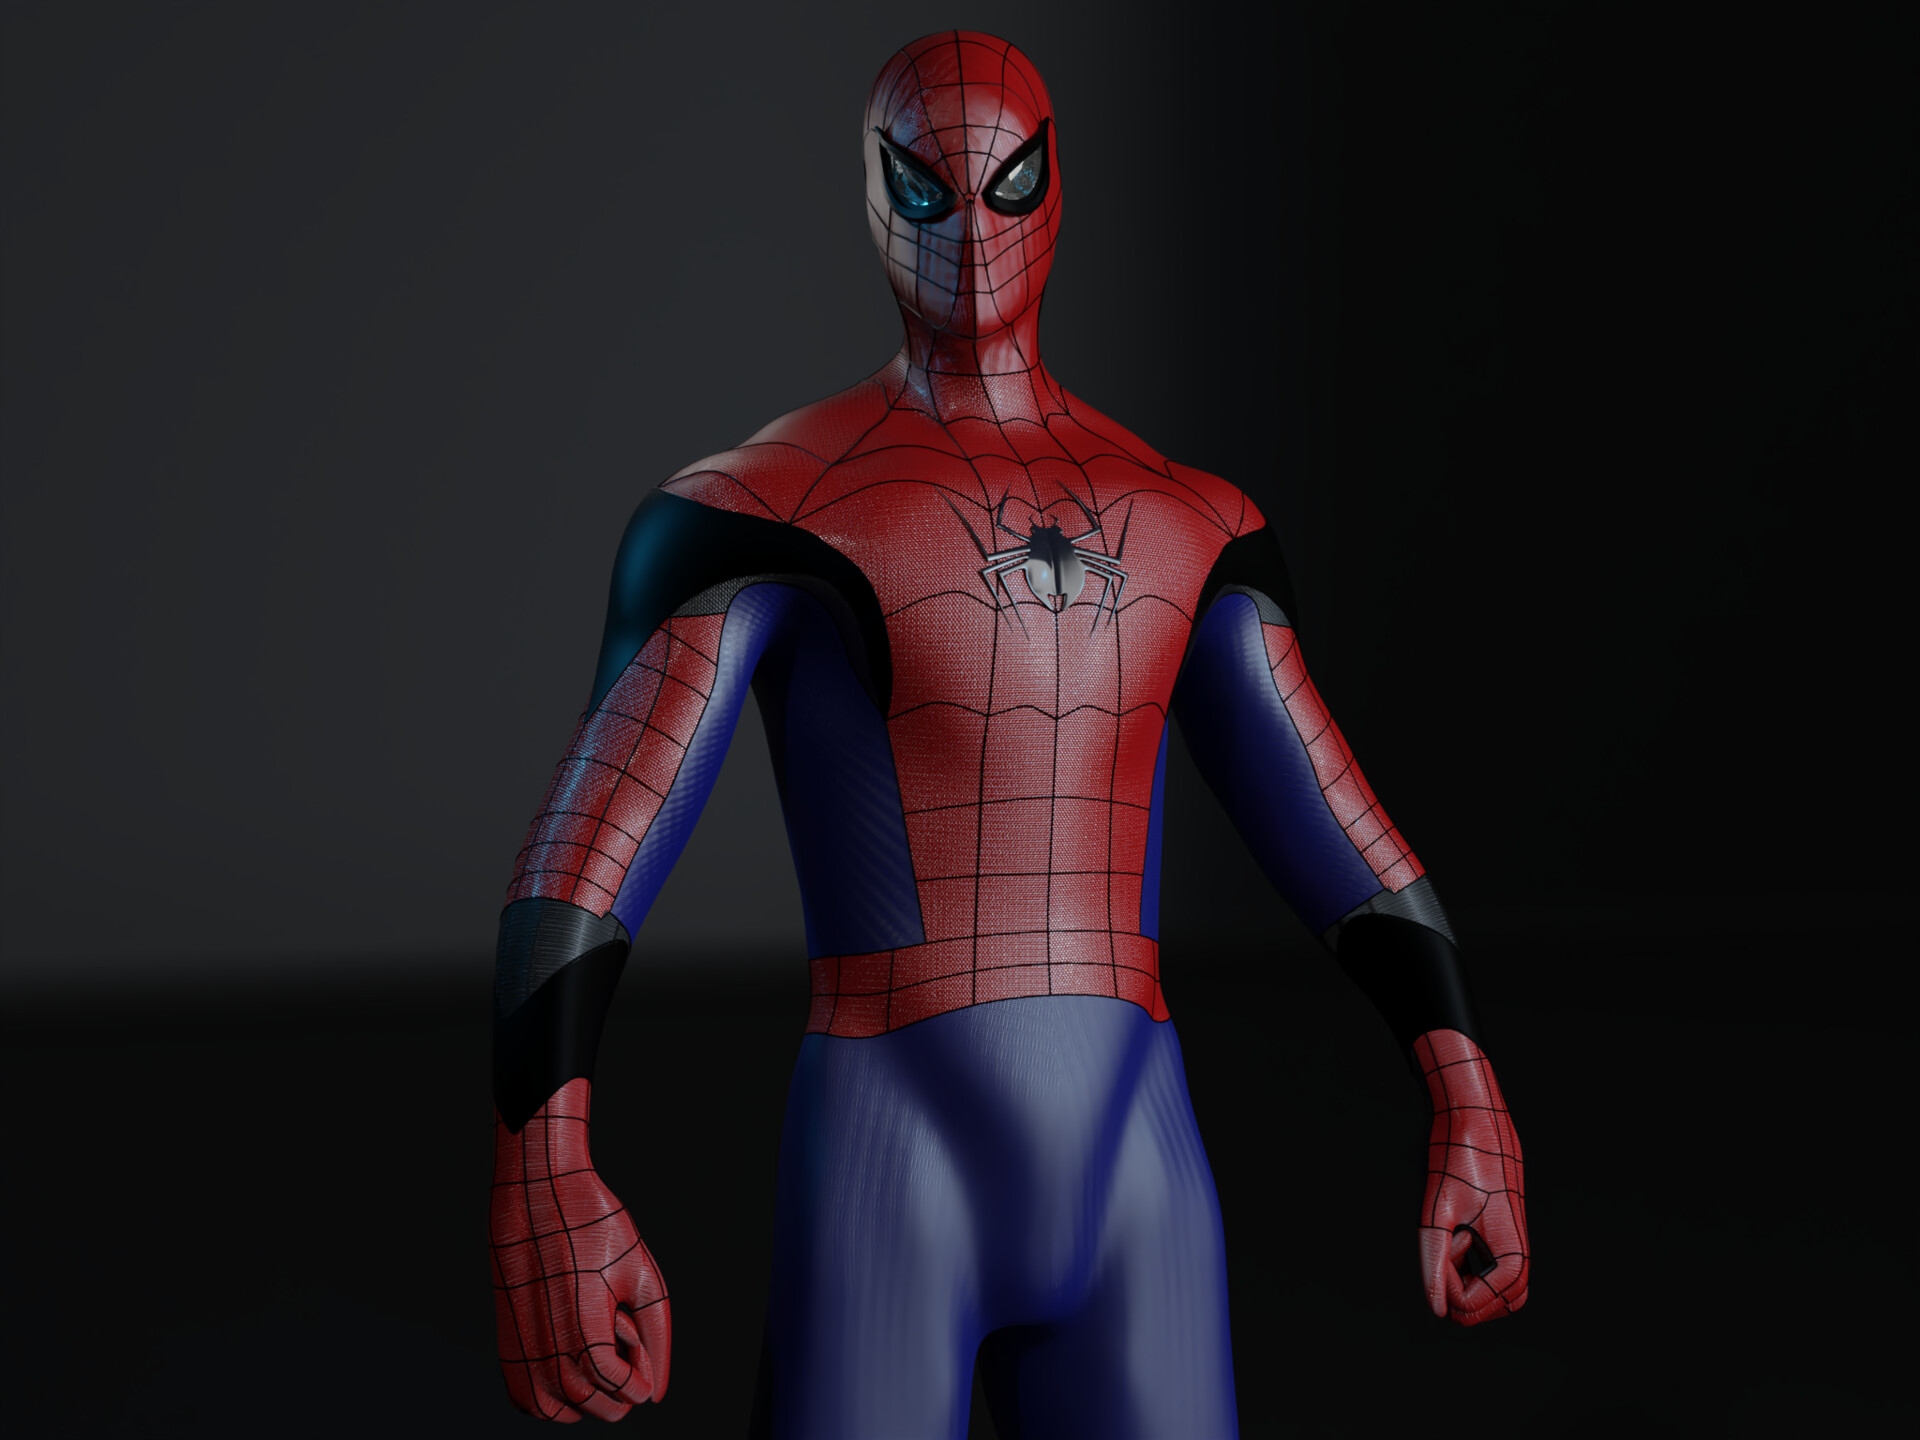 and it should have a strong sense of movement and action. Spider-Man should  be wearing his classic red and blue costume